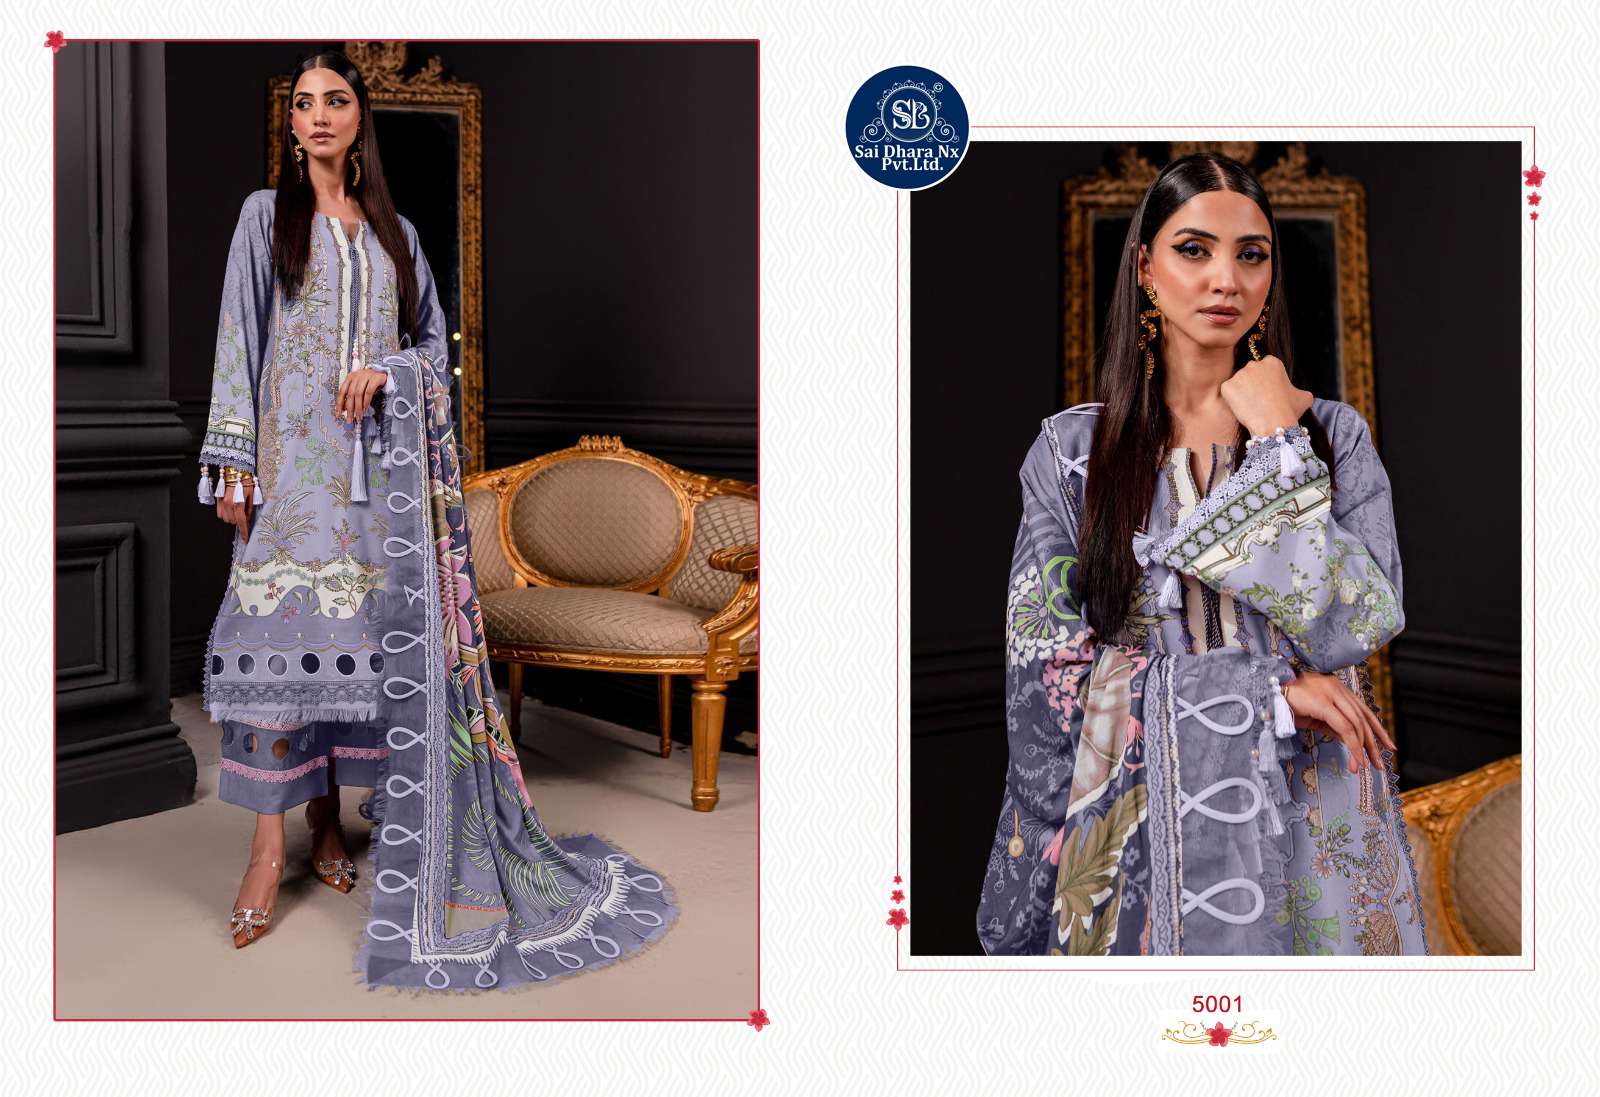 SHARADDHA DESIGNER PRESENTS LAWN COTTON PRINTED WITH HEAVY EMBROIDERY PATCH SUIT MATERIAL WHOLESALE SHOP IN SURAT - SaiDharaNx